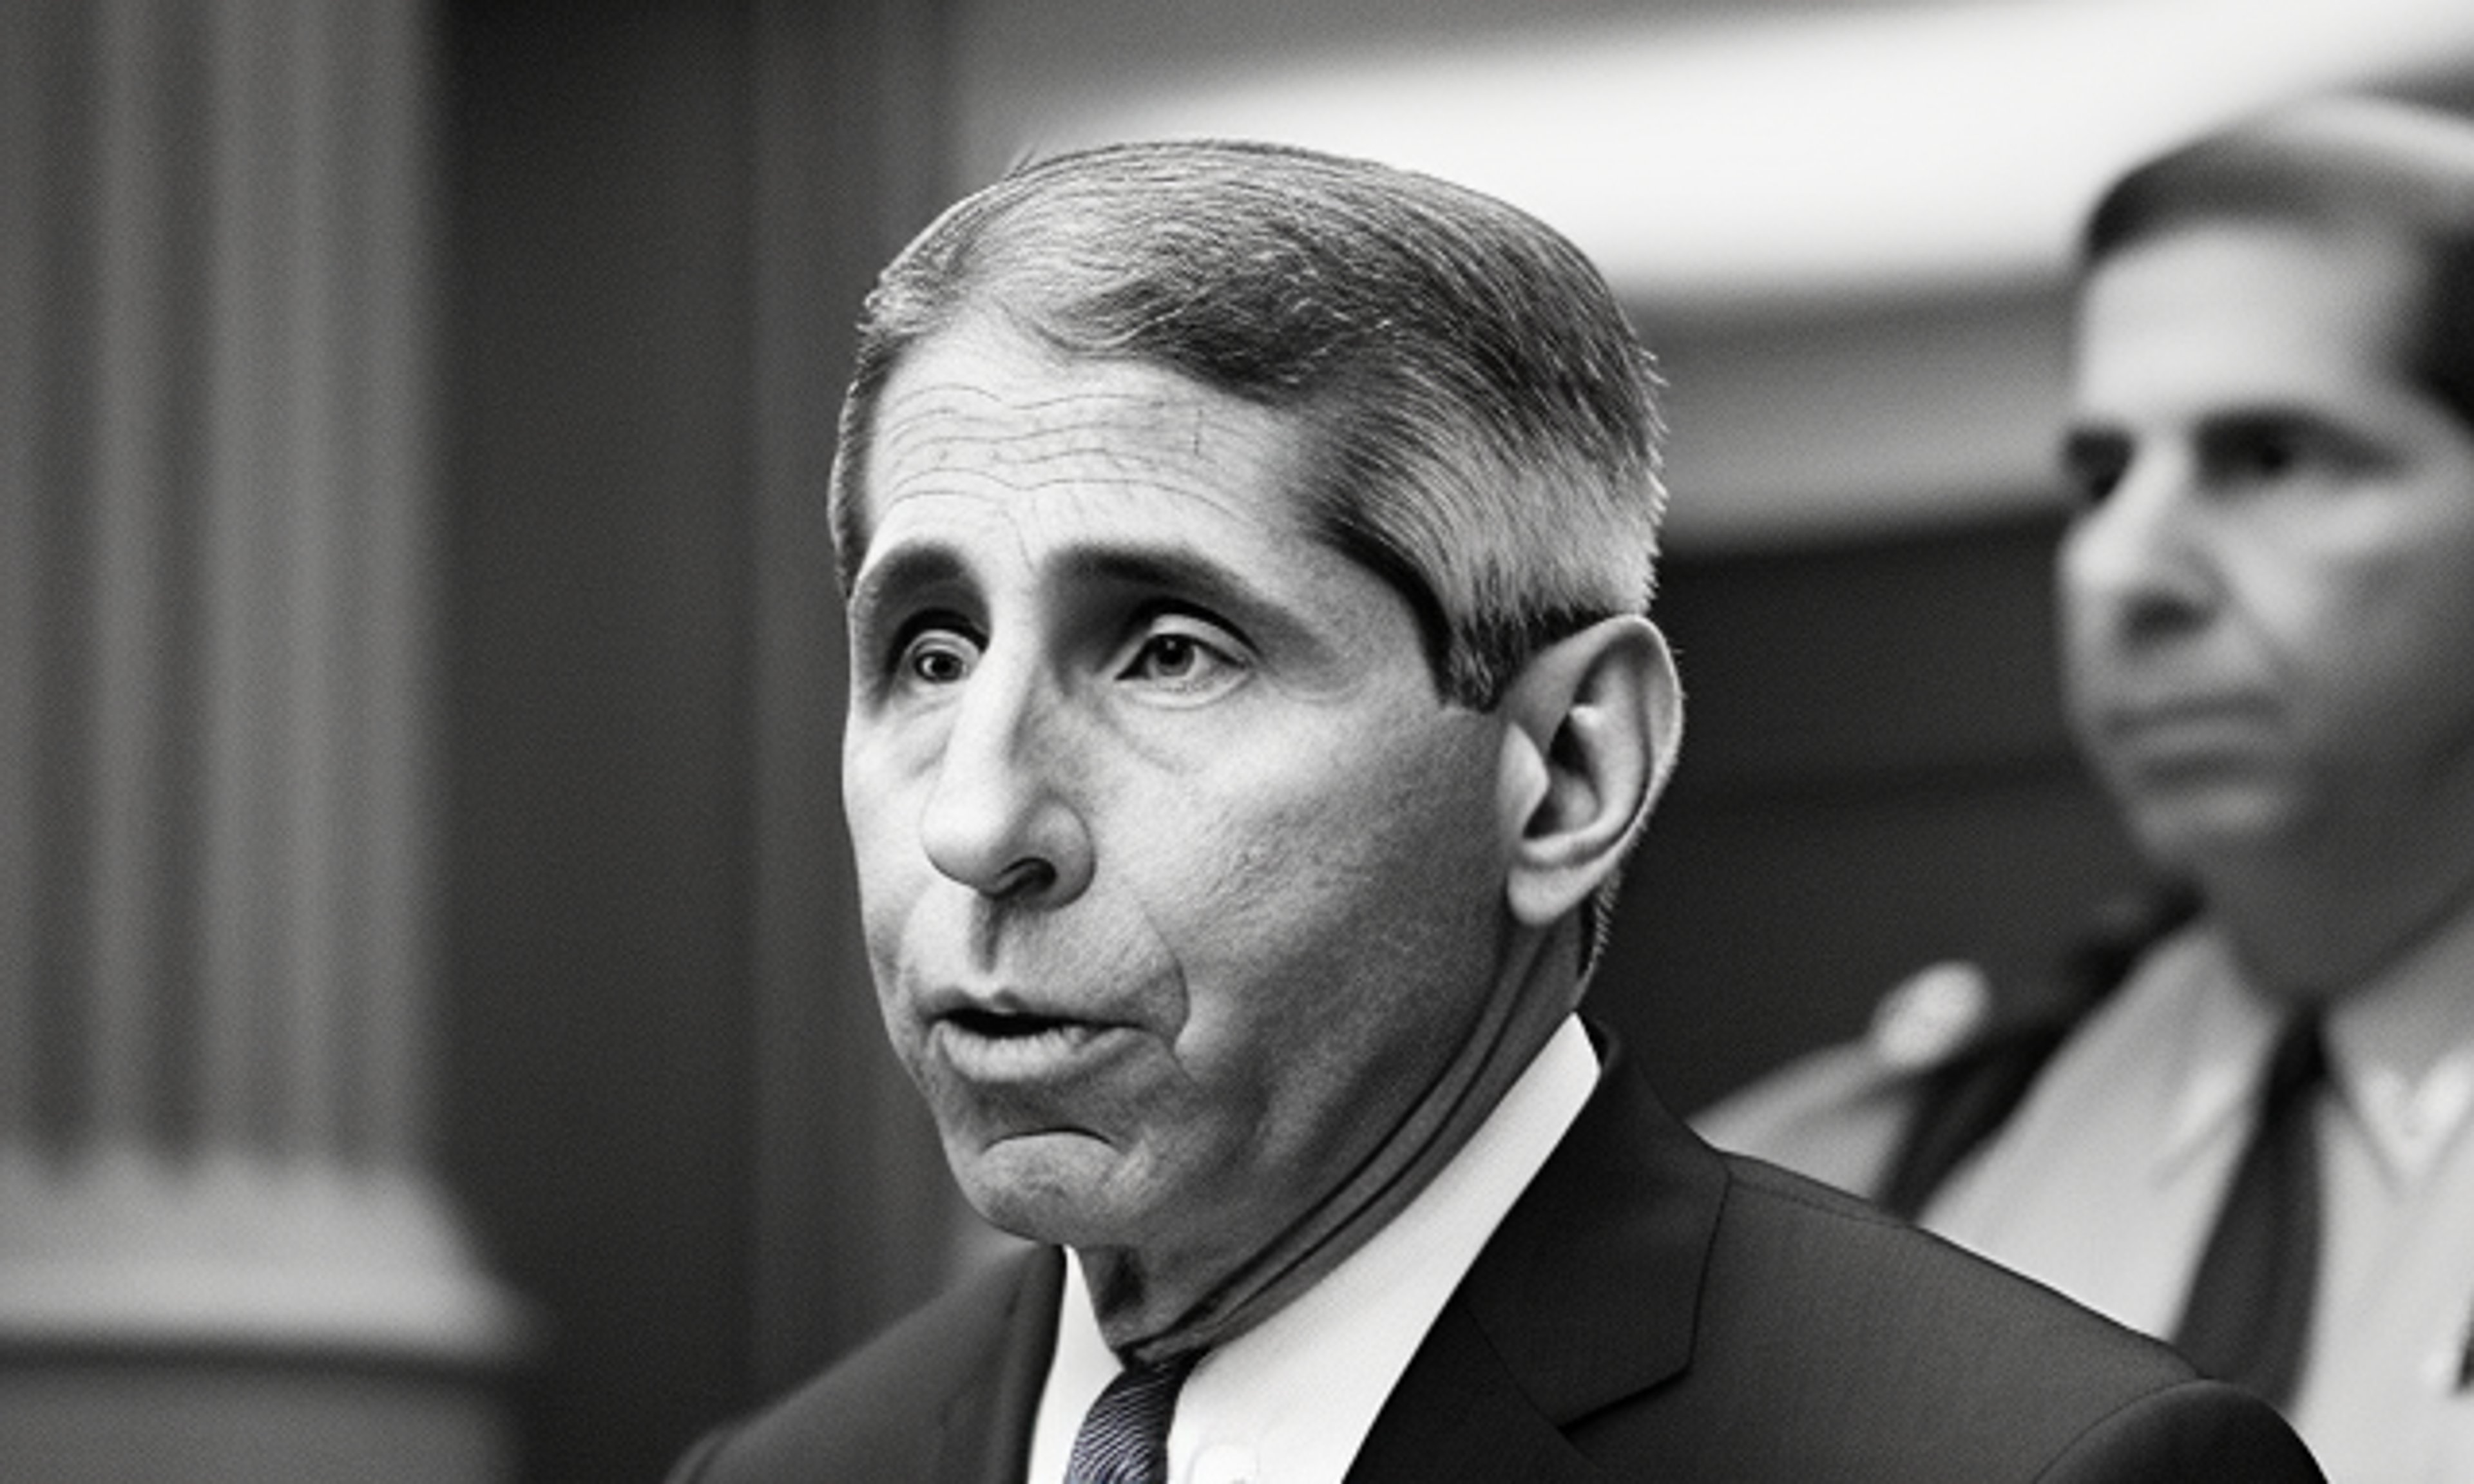 Missouri and Louisiana Attorneys General Depose Anthony Fauci in Deep State Lawsuit